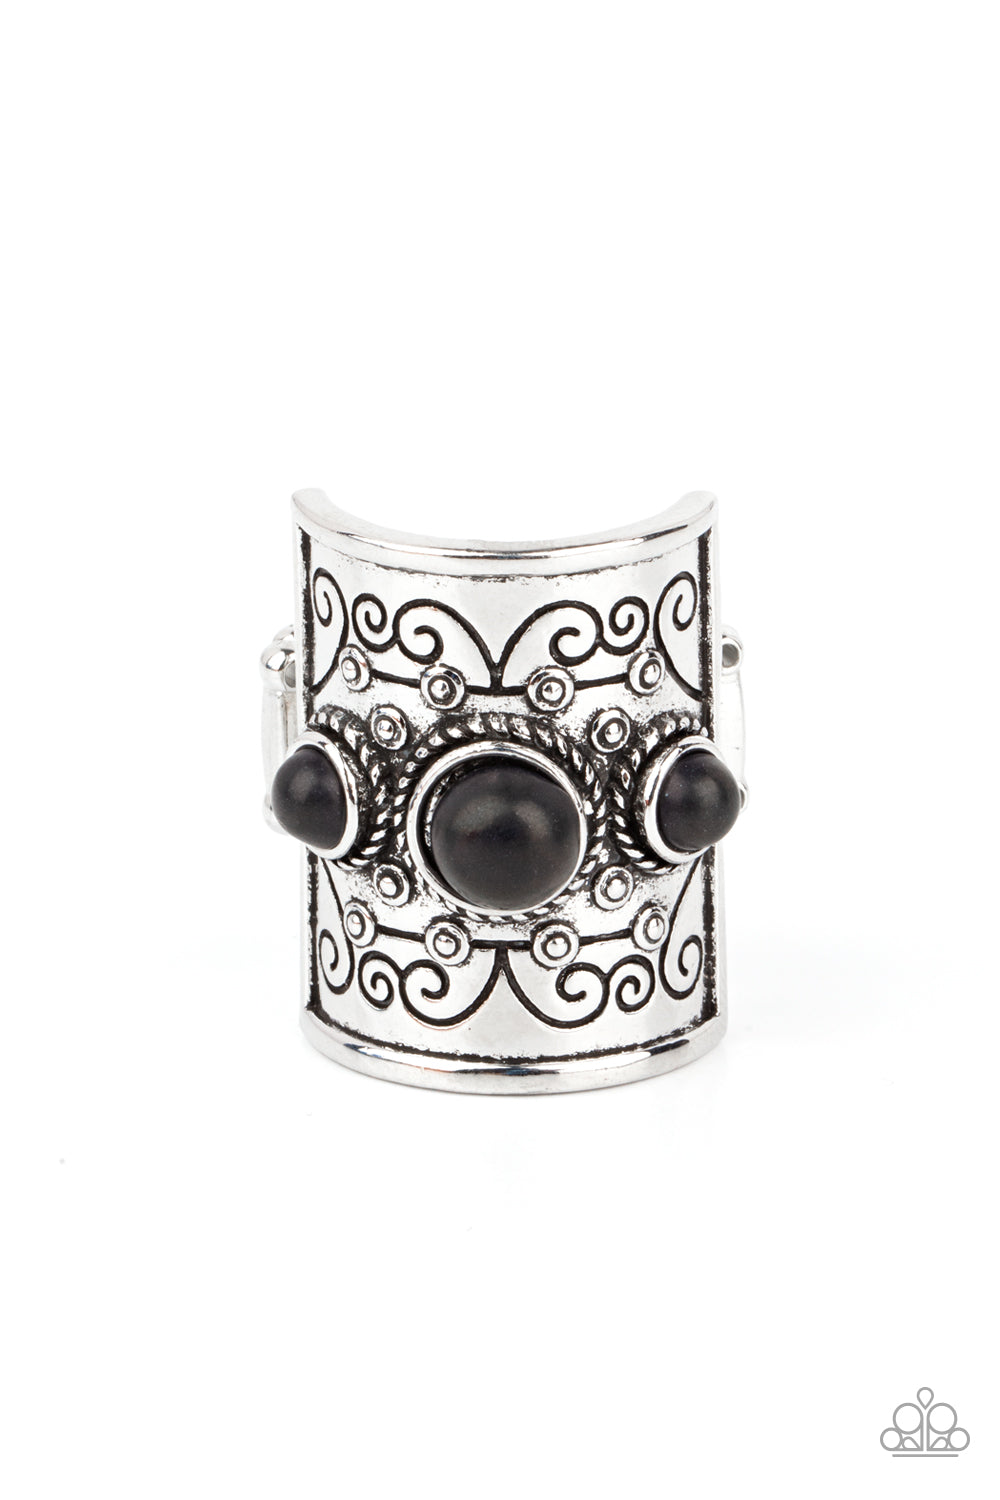 Southwestern Scenery - Black and Silver Fashion Ring - Paparazzi Accessories - Dotted with an earthy row of black stones, a rectangular silver frame stamped in tribal inspired patterns folds around the finger for a simply seasonal look. Features a stretchy band for a flexible fit. Sold as one individual ring.